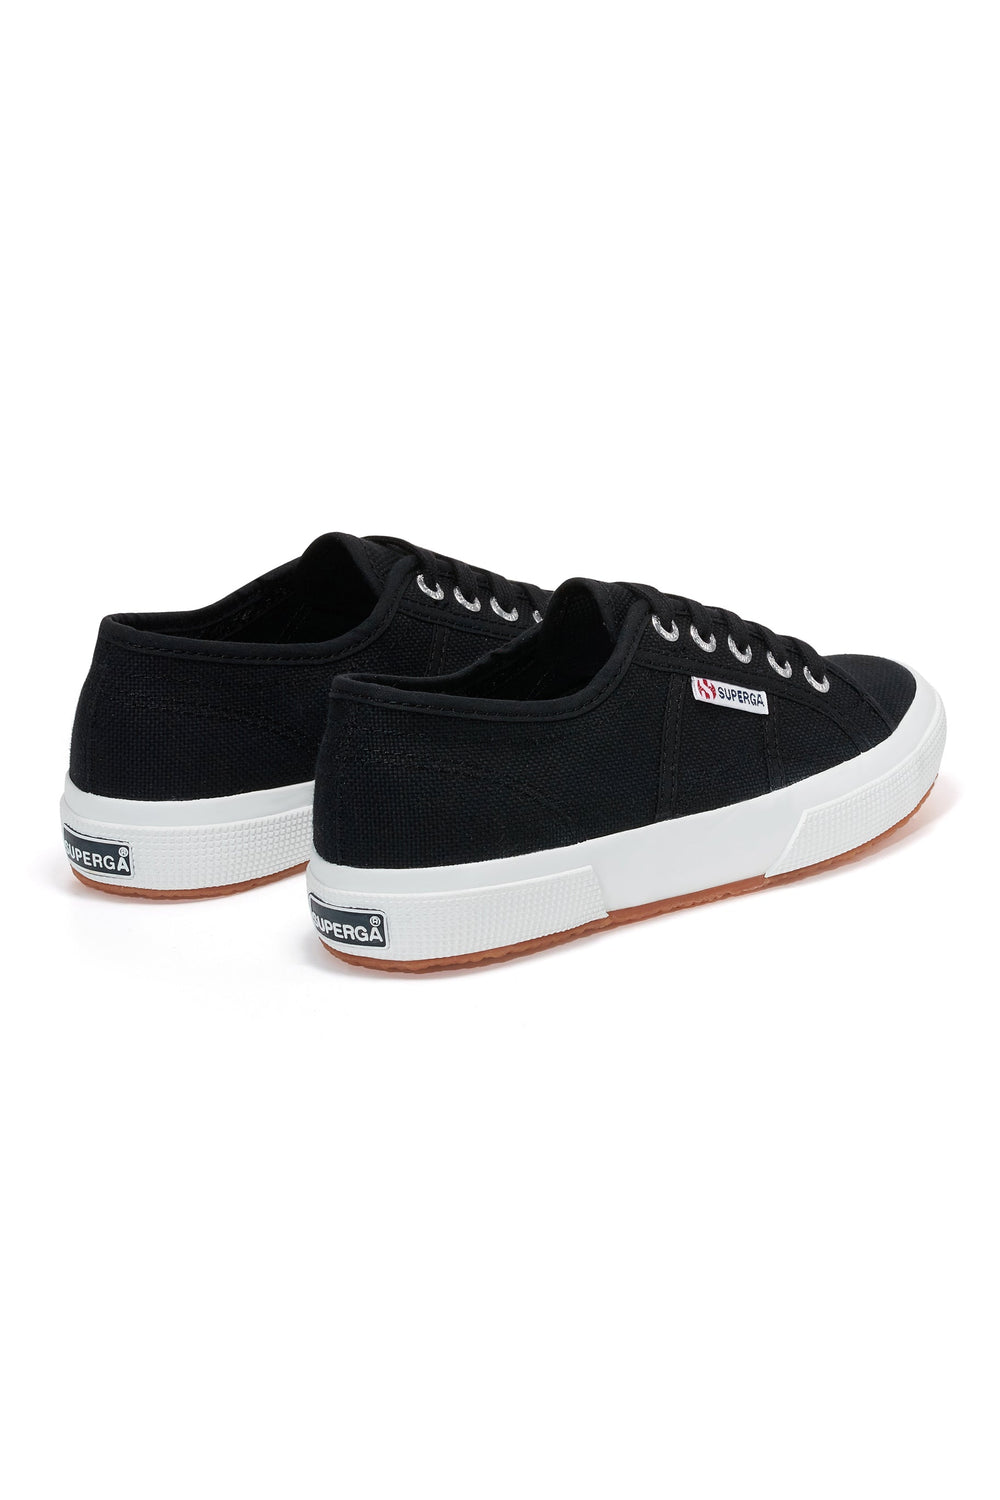 Petal and Pup USA SHOES 2750 Cotu Classic Sneaker - Black